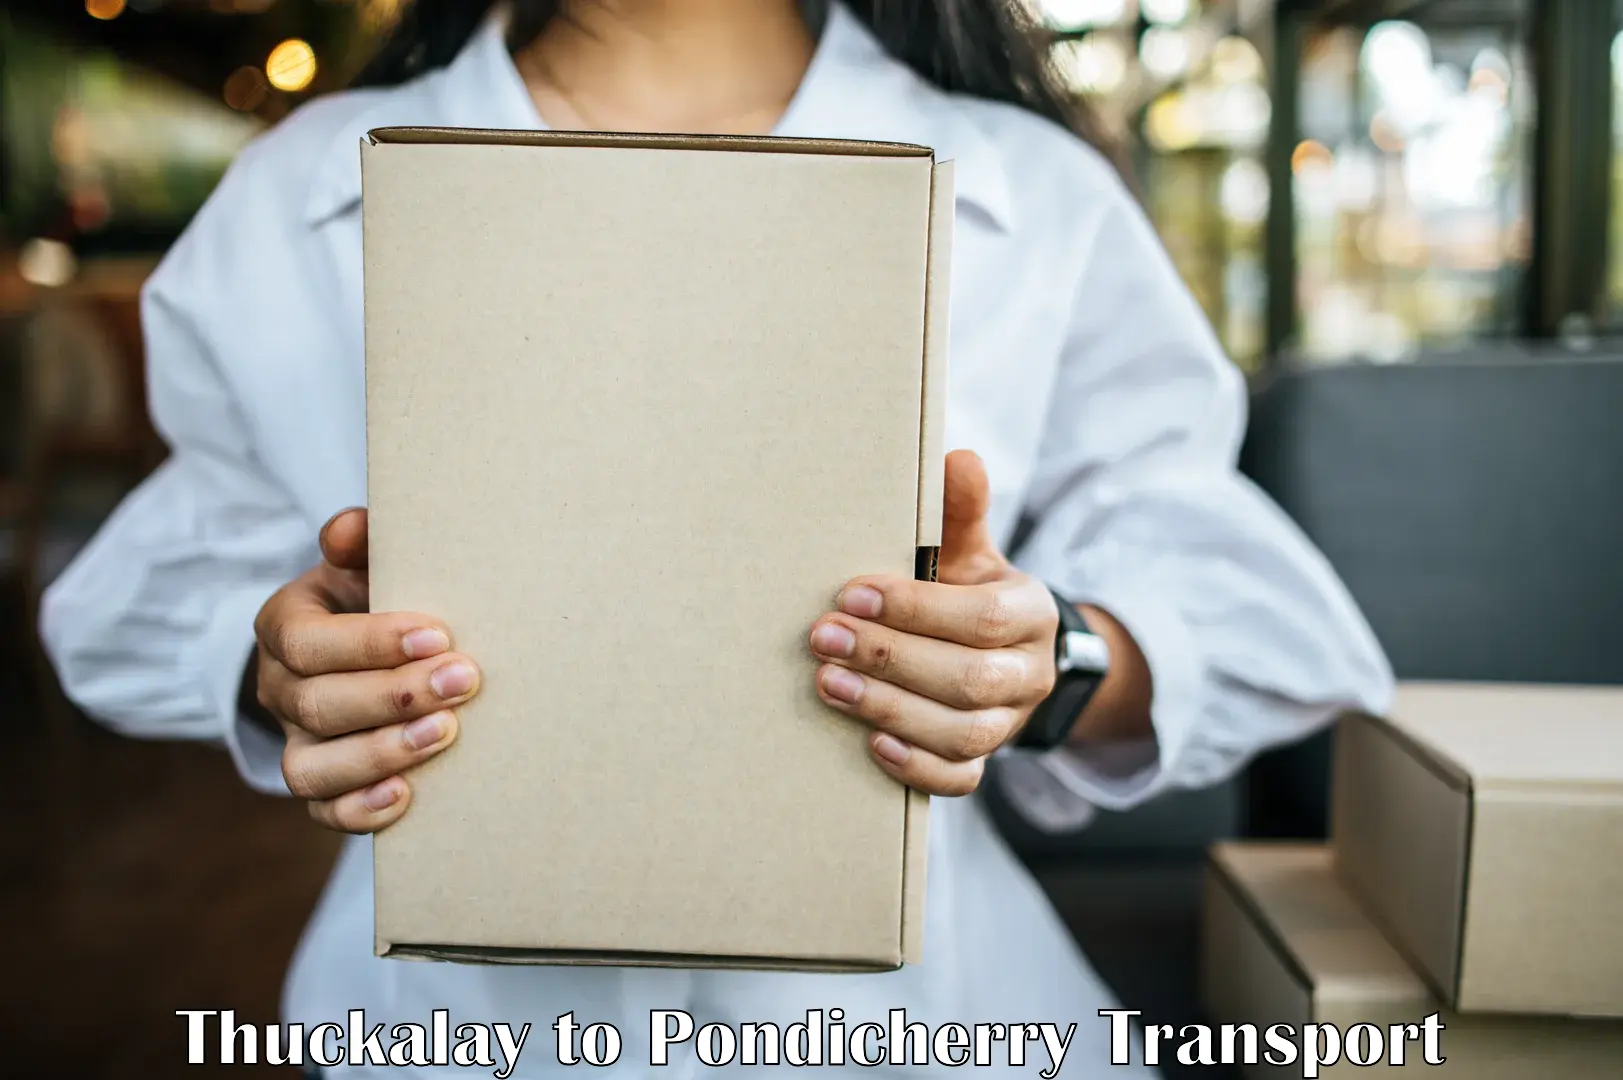 Parcel transport services Thuckalay to Pondicherry